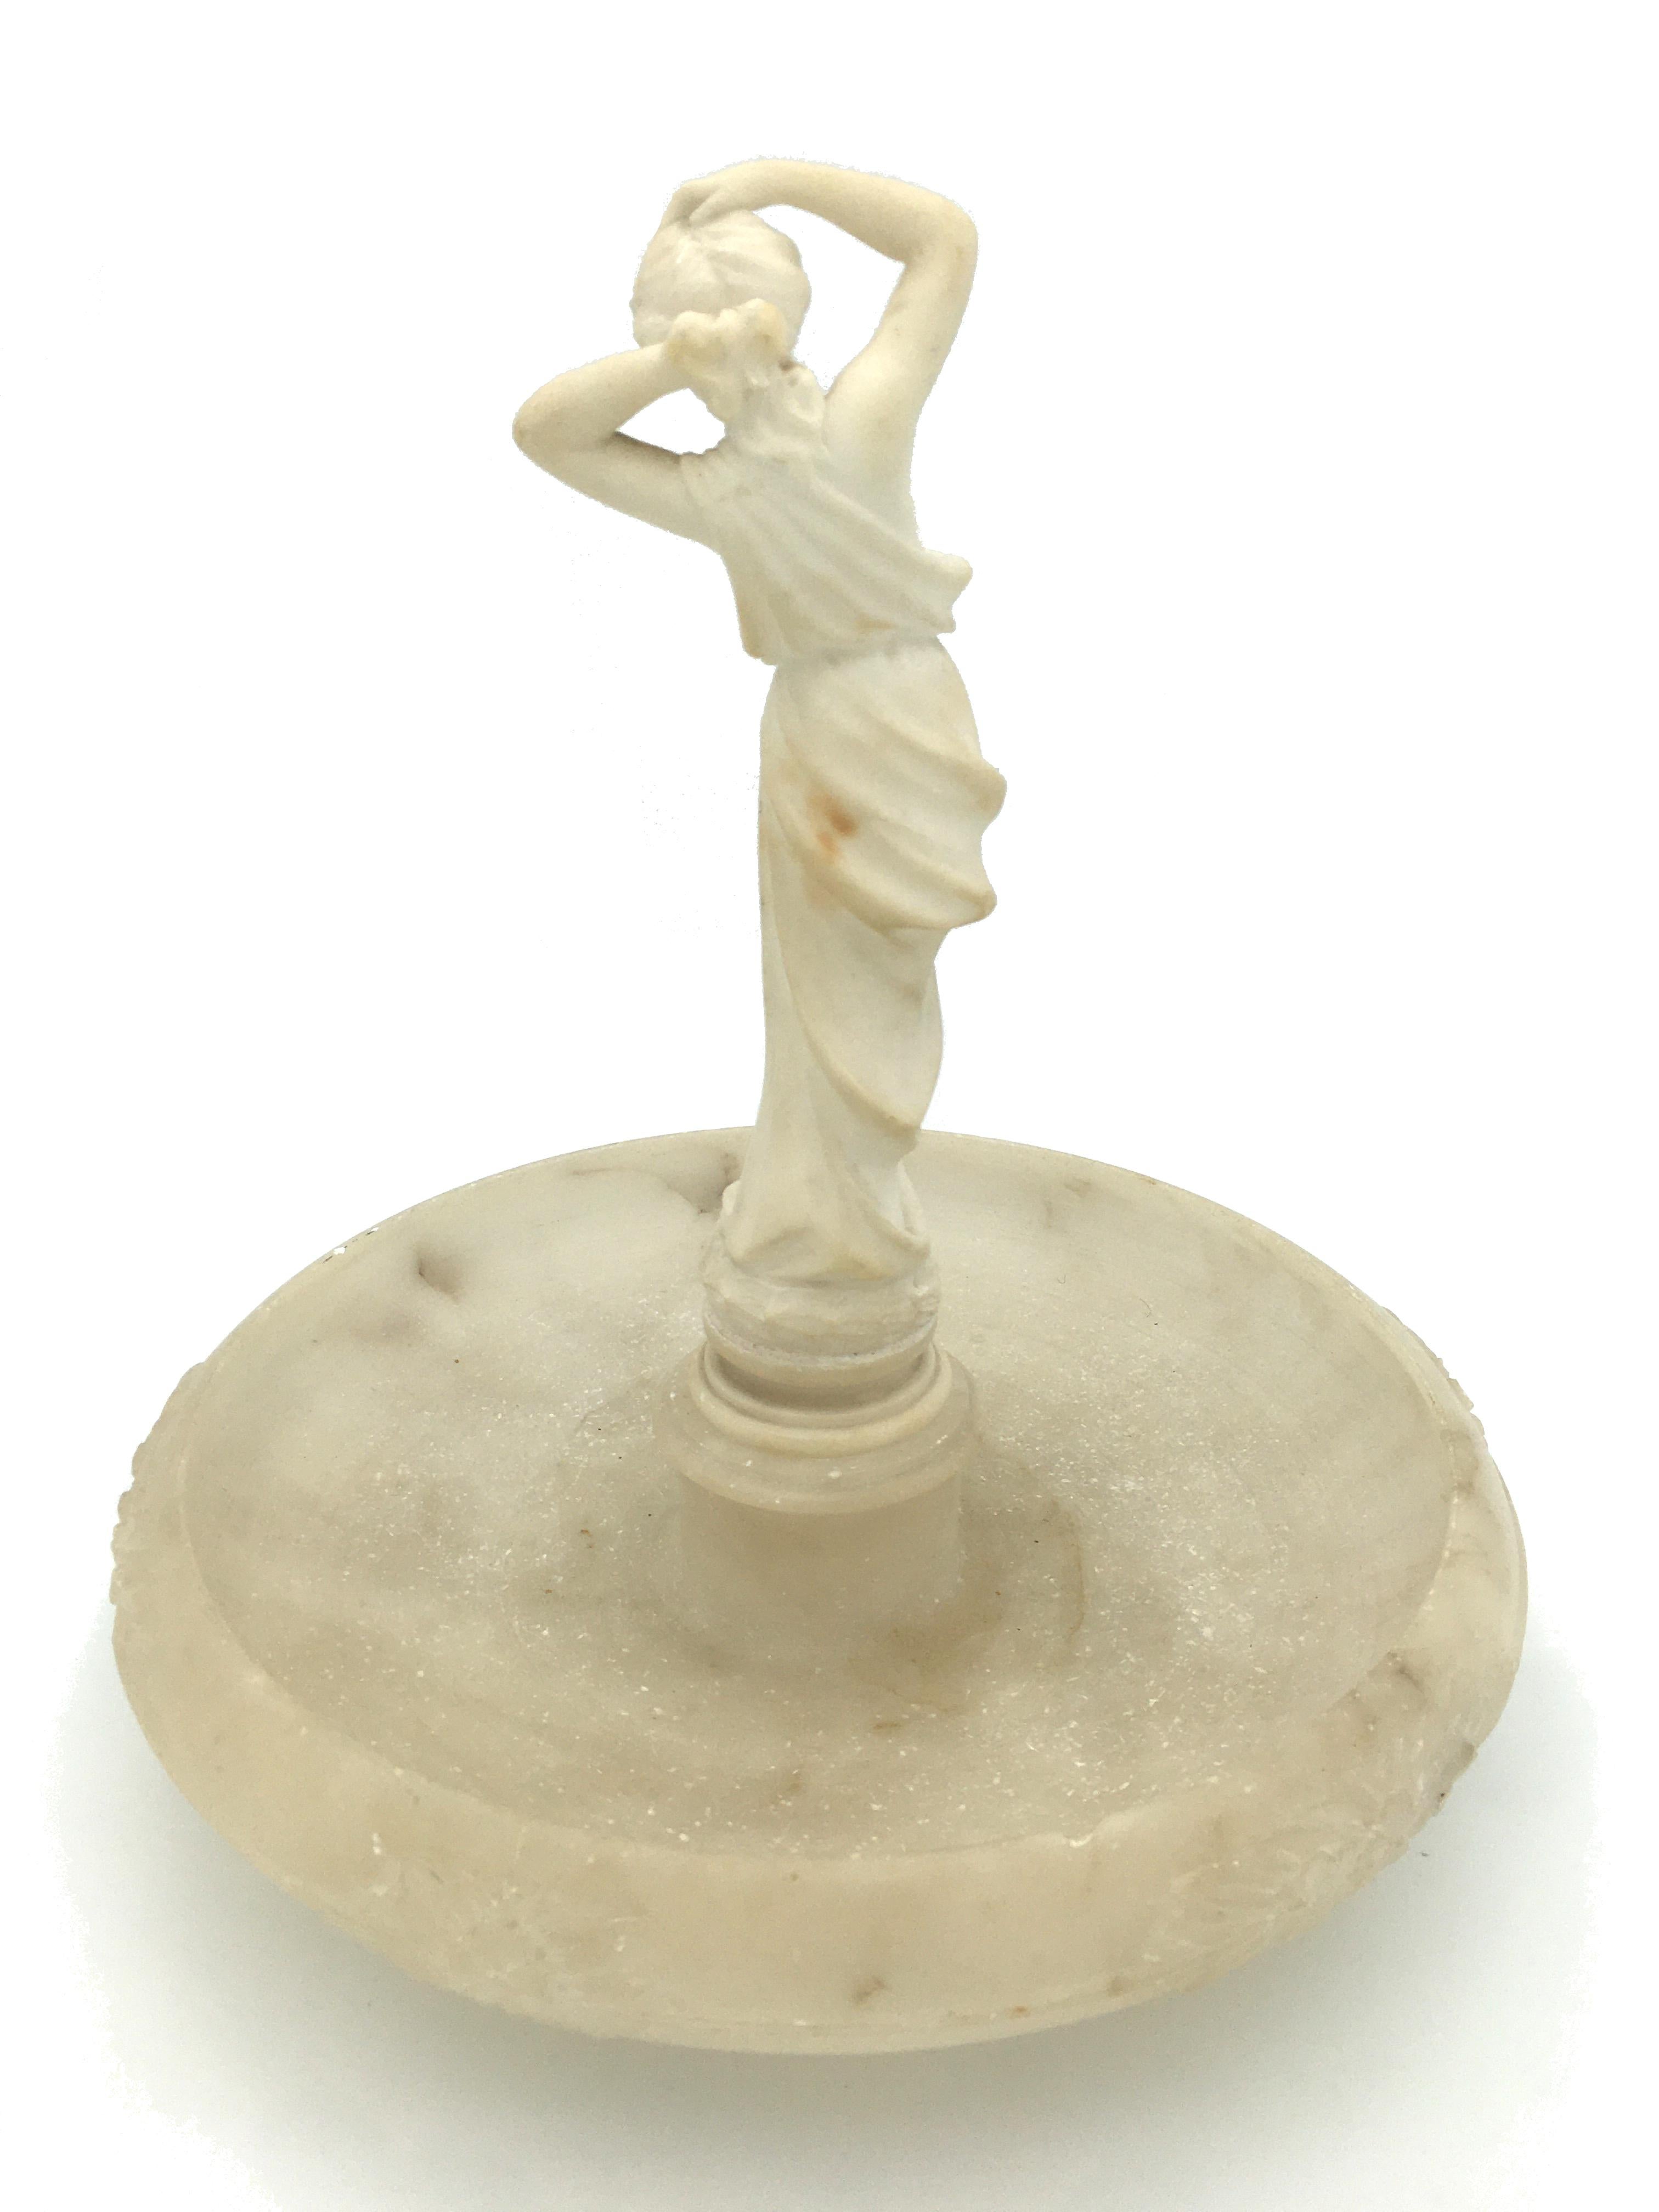 Delightful Art Nouveau alabaster vide-poche with a Venus statue, treated like a miniature fountain. The venus that is draped Roman-style has a bare breast and fixes her hair with her hands. The basin of the vide-poche, the rim of which is decorated